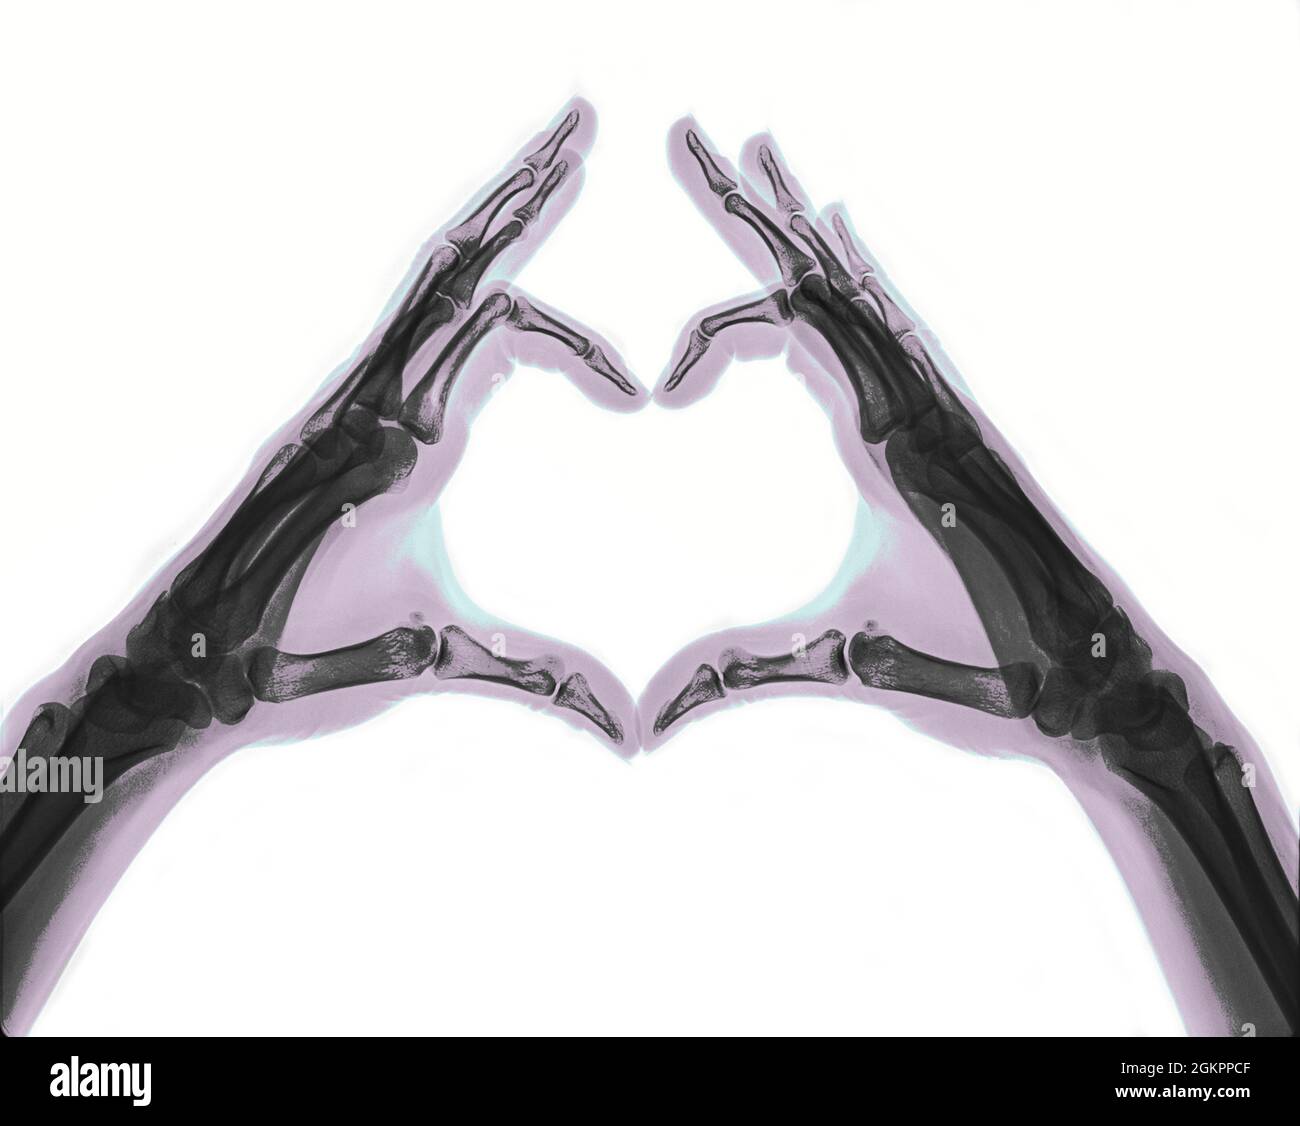 X-ray of hands forming a heart shape Stock Photo